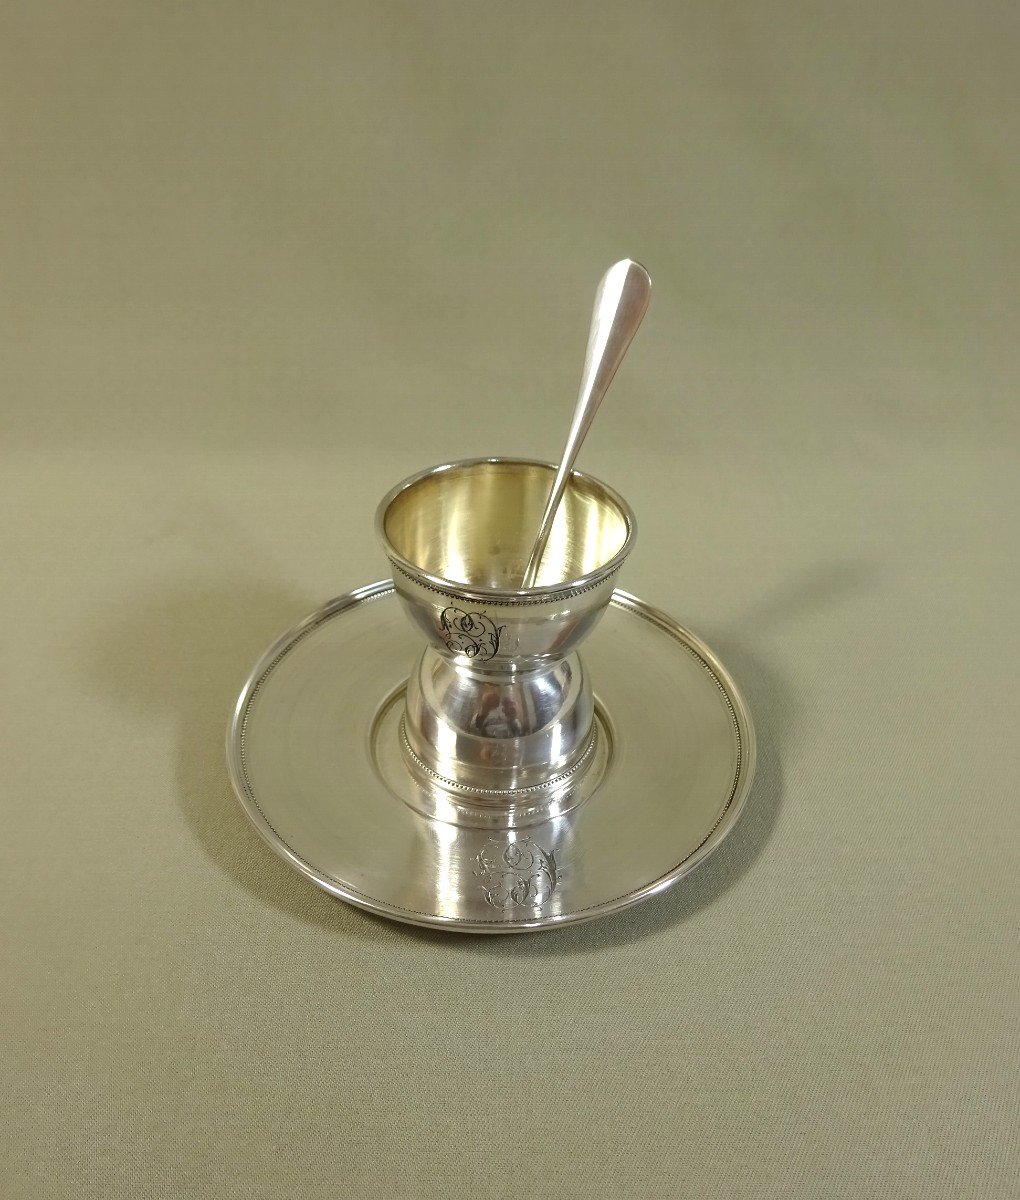 Egg Cup In Silver Minerva, Accompanied By Its Original Stick And Small Spoon.-photo-2